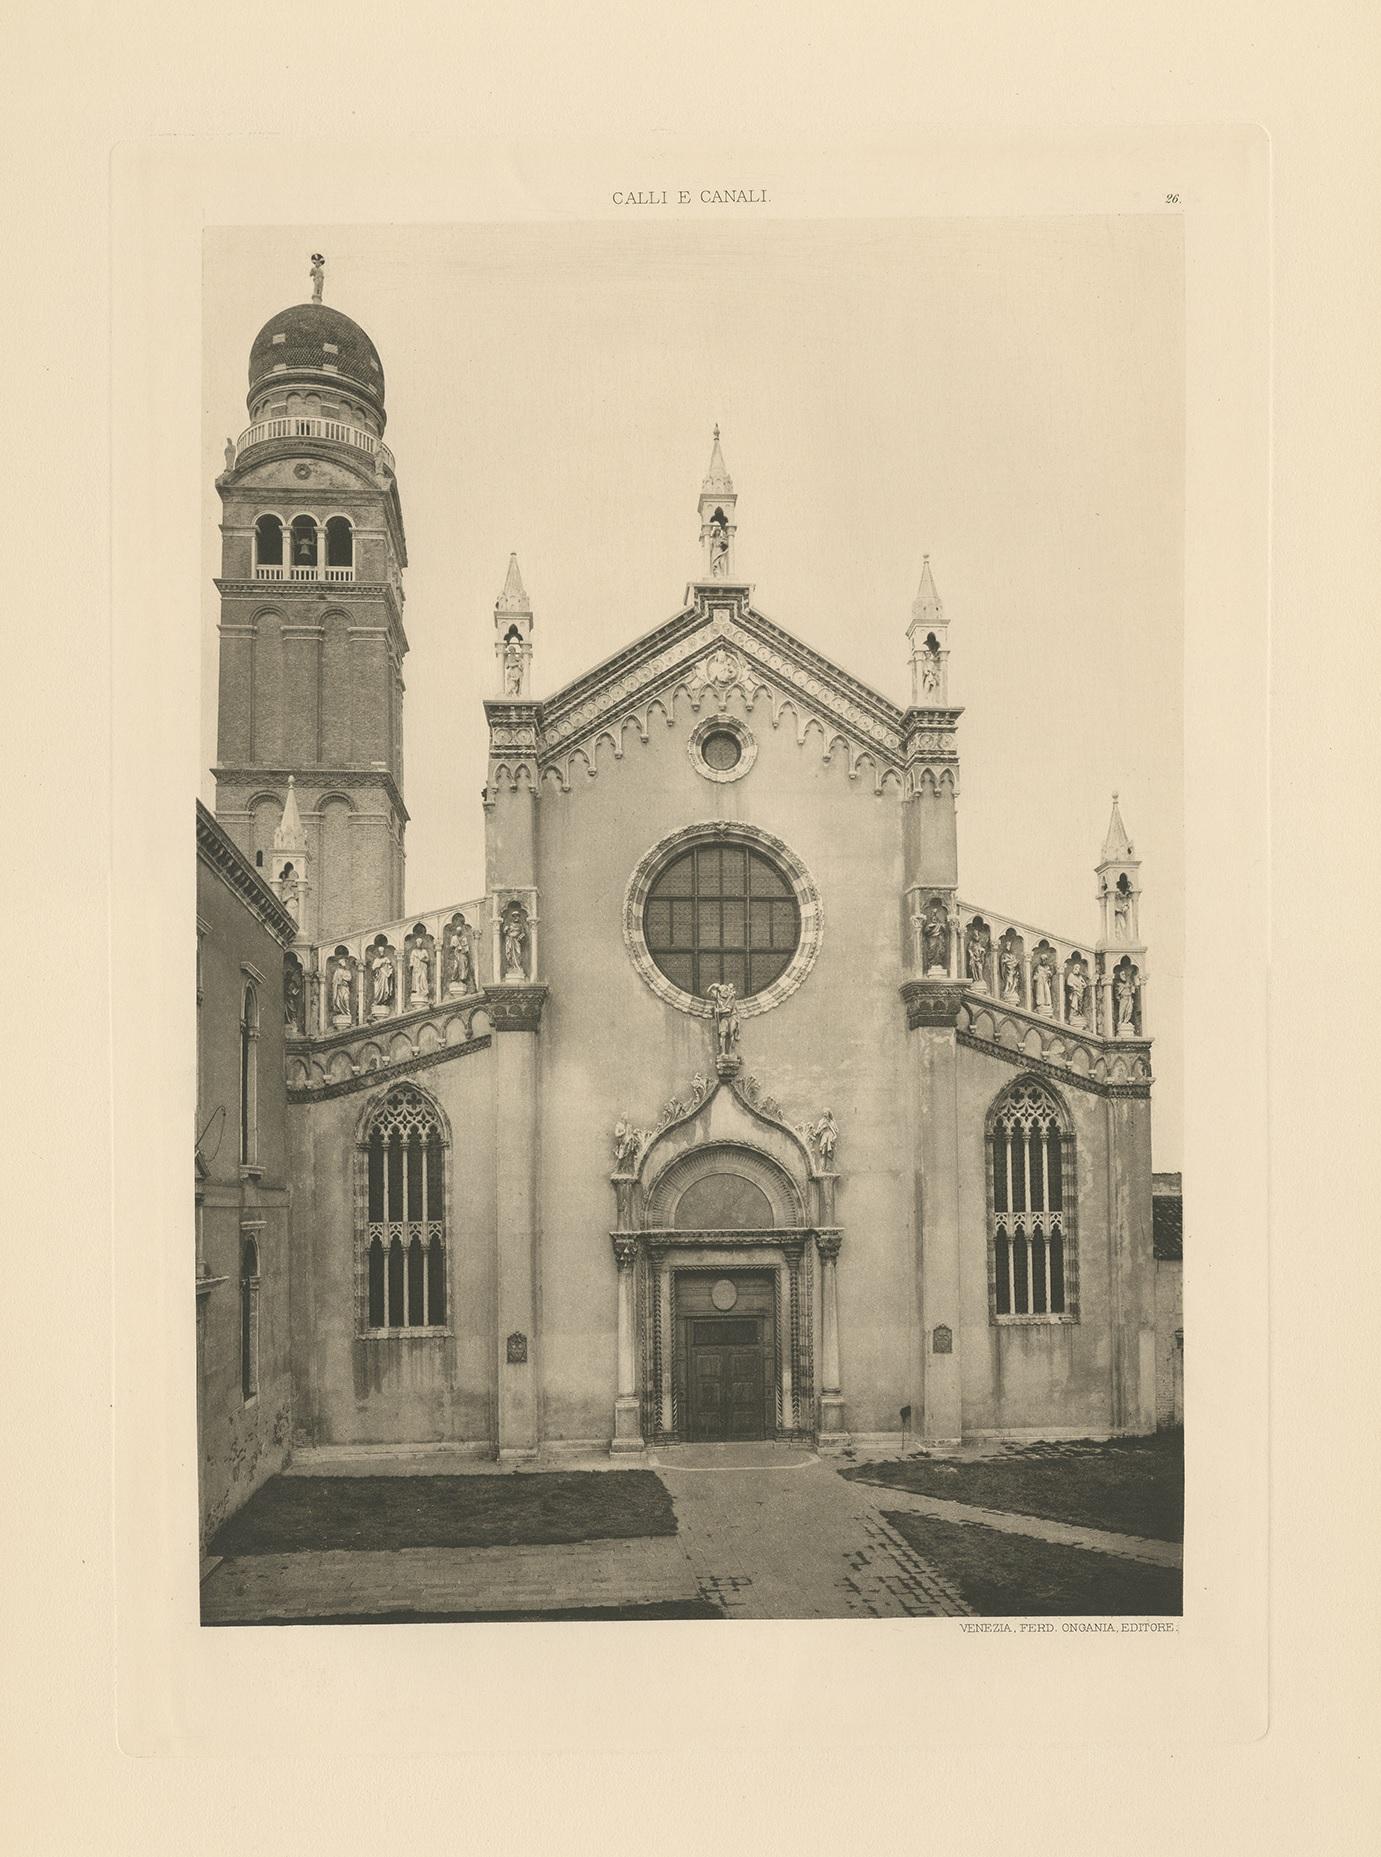 Photogravure of Madonna dell'Orto, a church in Venice, Italy, in the sestiere of Cannaregio. The church was erected by the now-defunct religious order the 